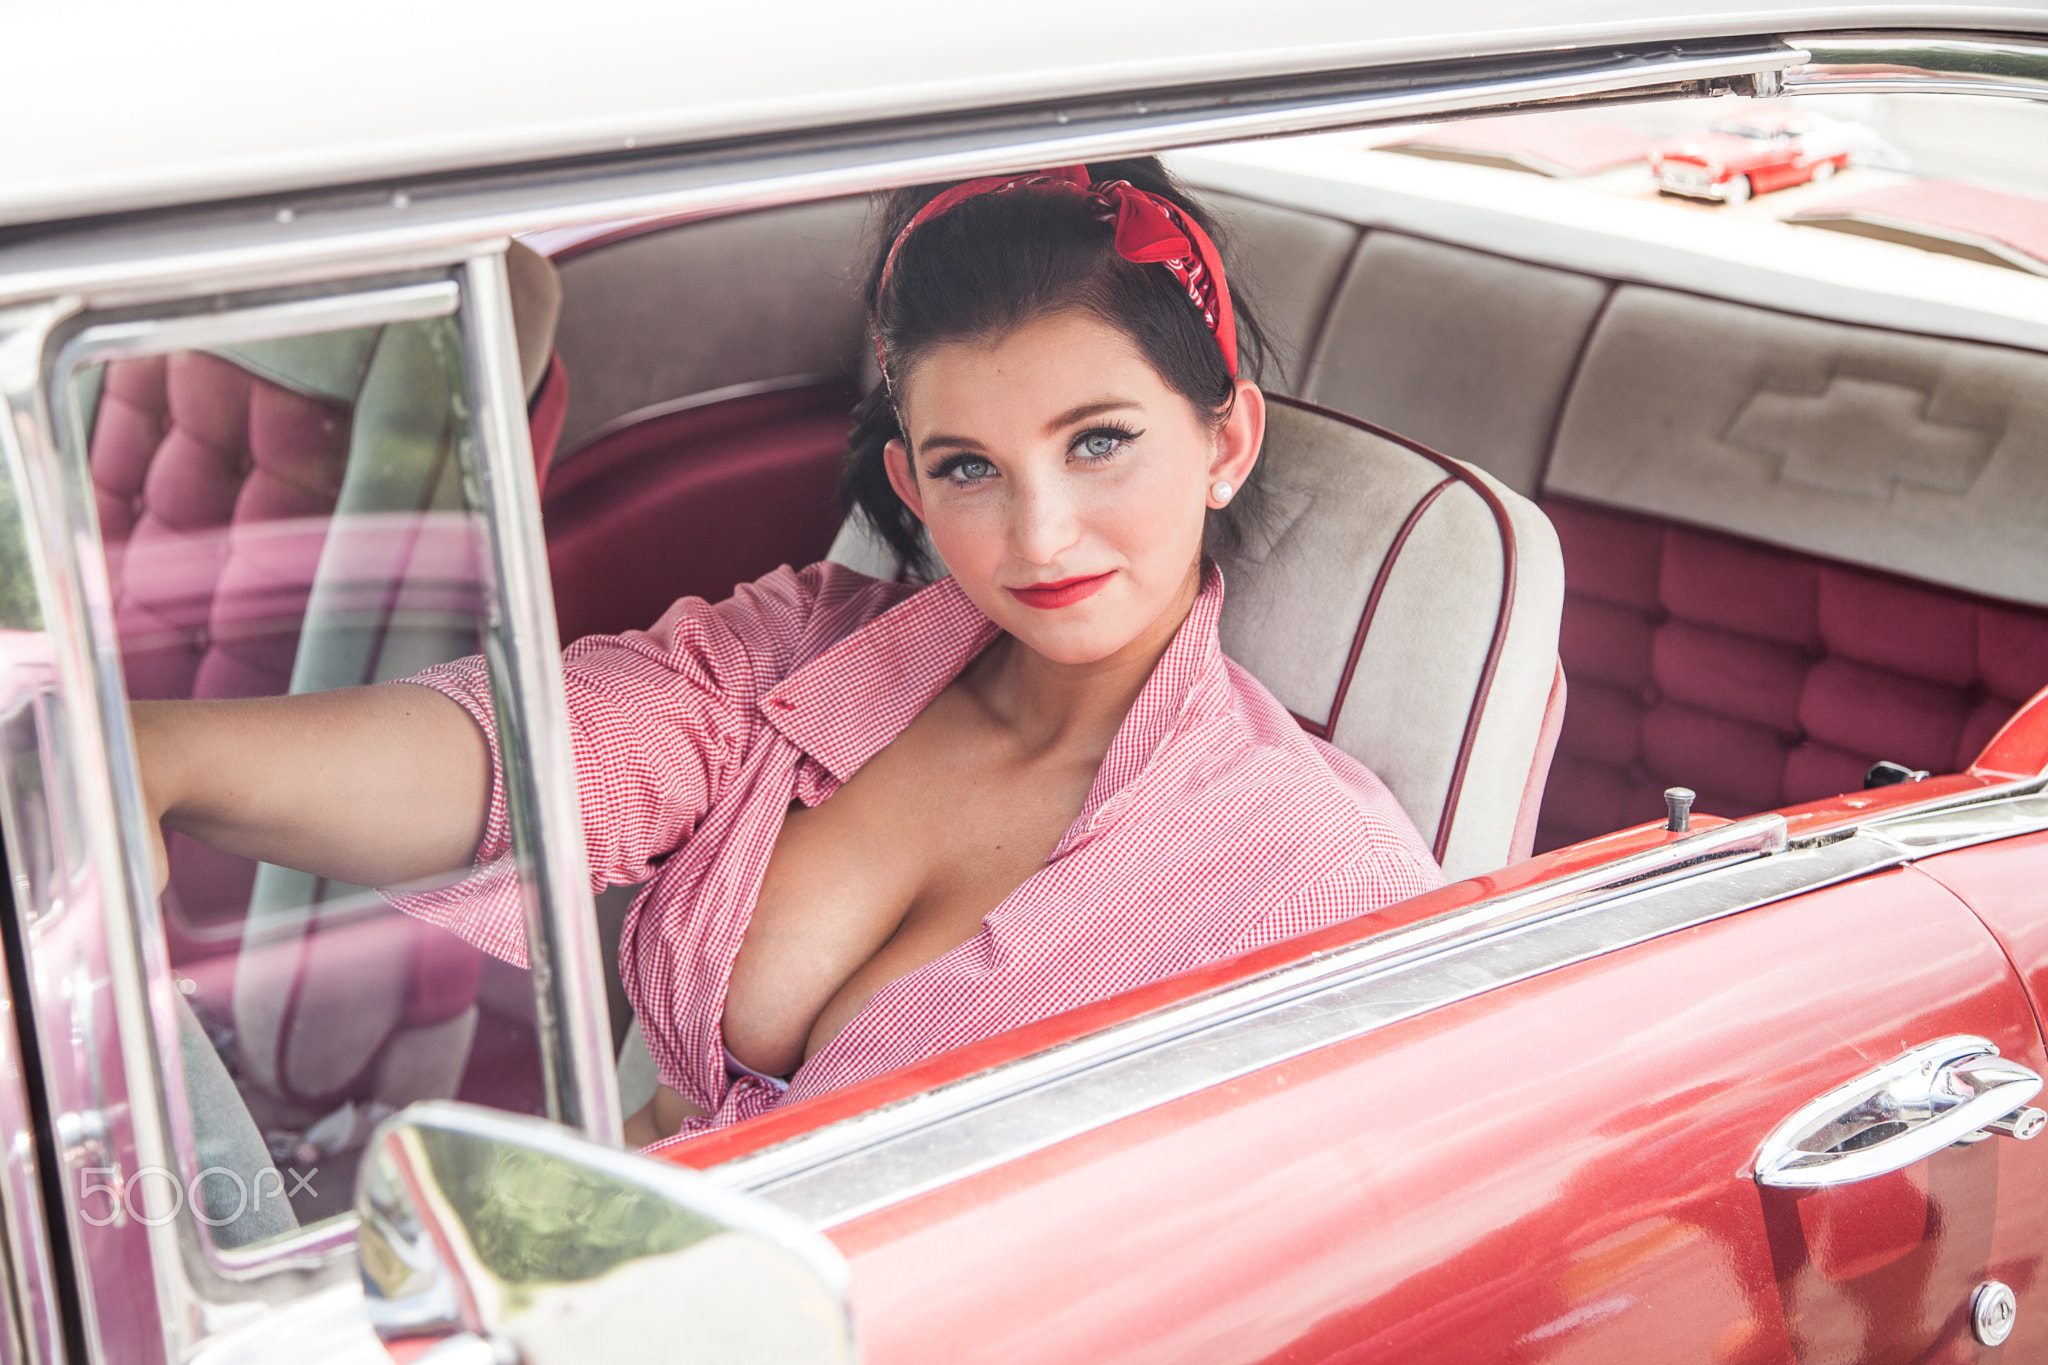 People 2048x1365 cleavage women car oldtimers vehicle women with cars Jeff Cain 500px model pinup models